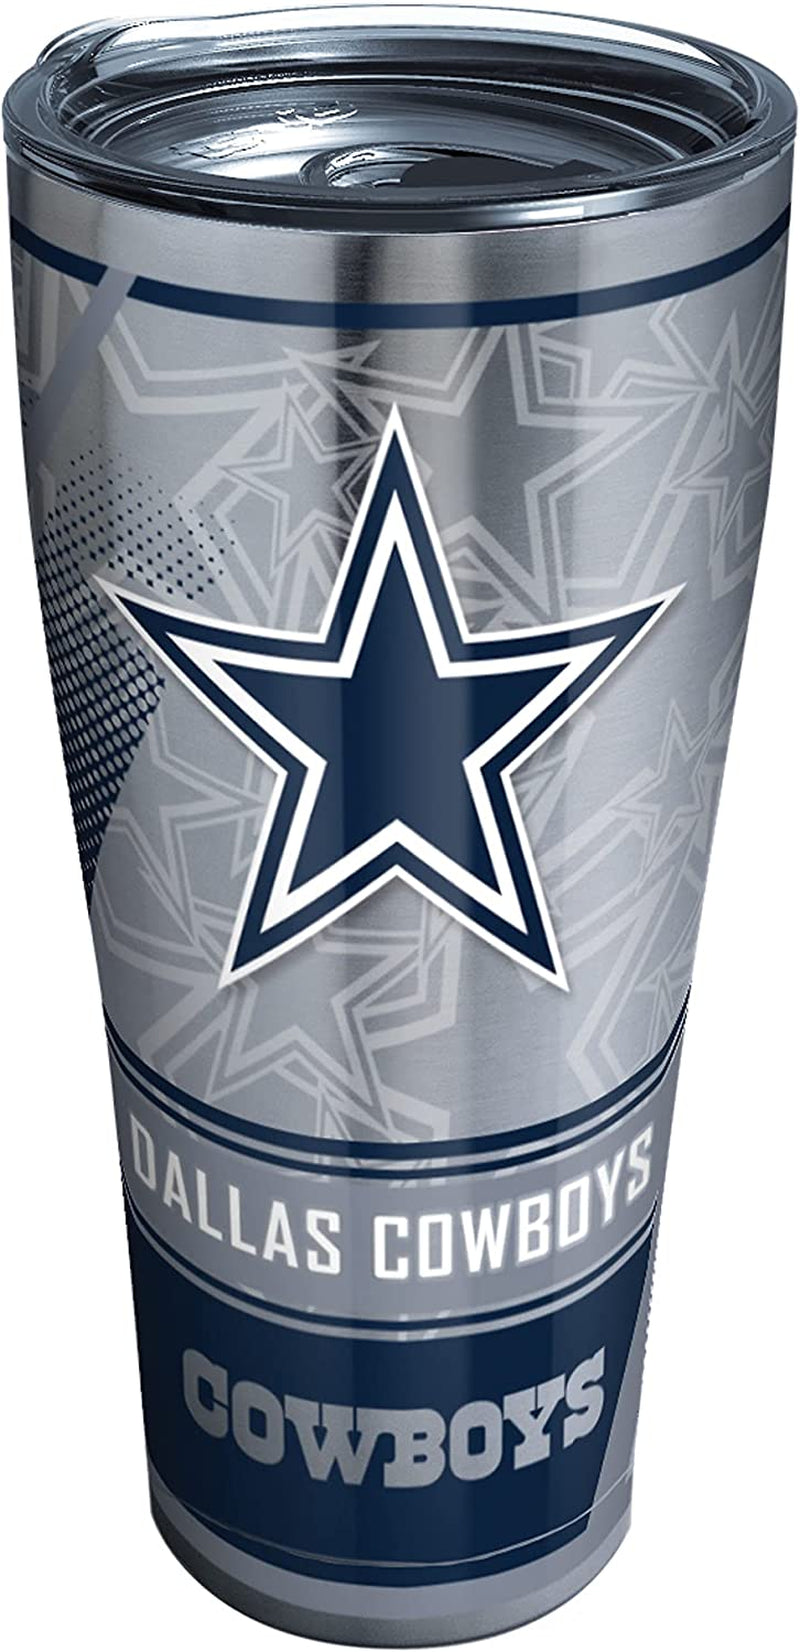 Tervis Triple Walled NFL Dallas Cowboys Edge Insulated Tumbler Cup Keeps Drinks Cold & Hot, 20Oz, Stainless Steel